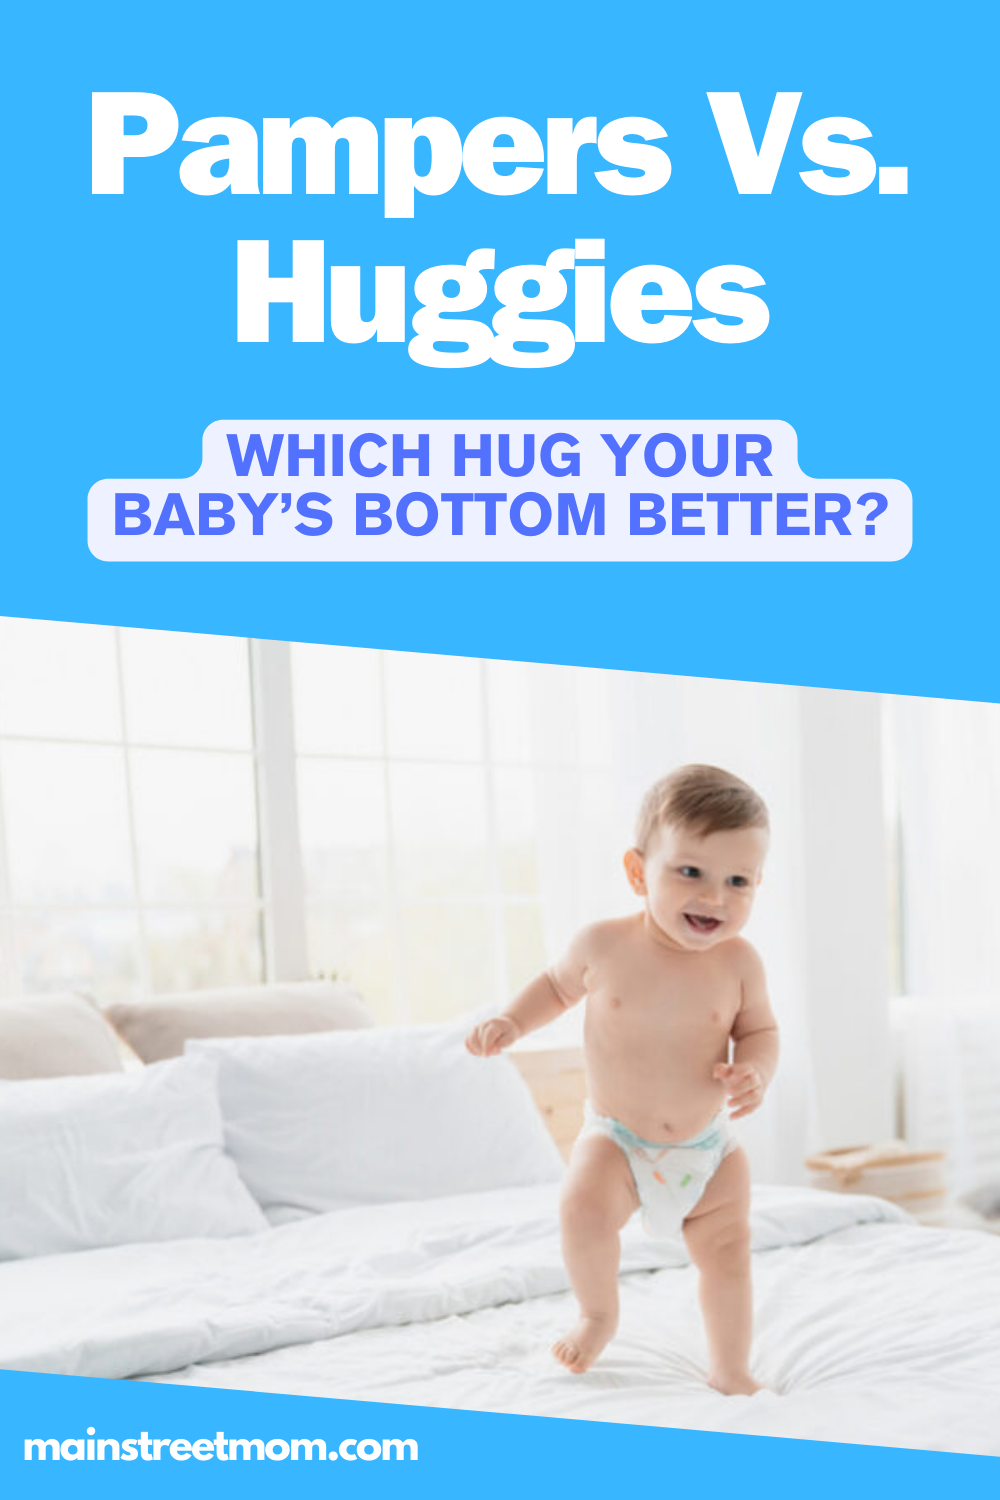 Pampers Vs. Huggies: Which Hug Your Baby’s Bottom Better?
